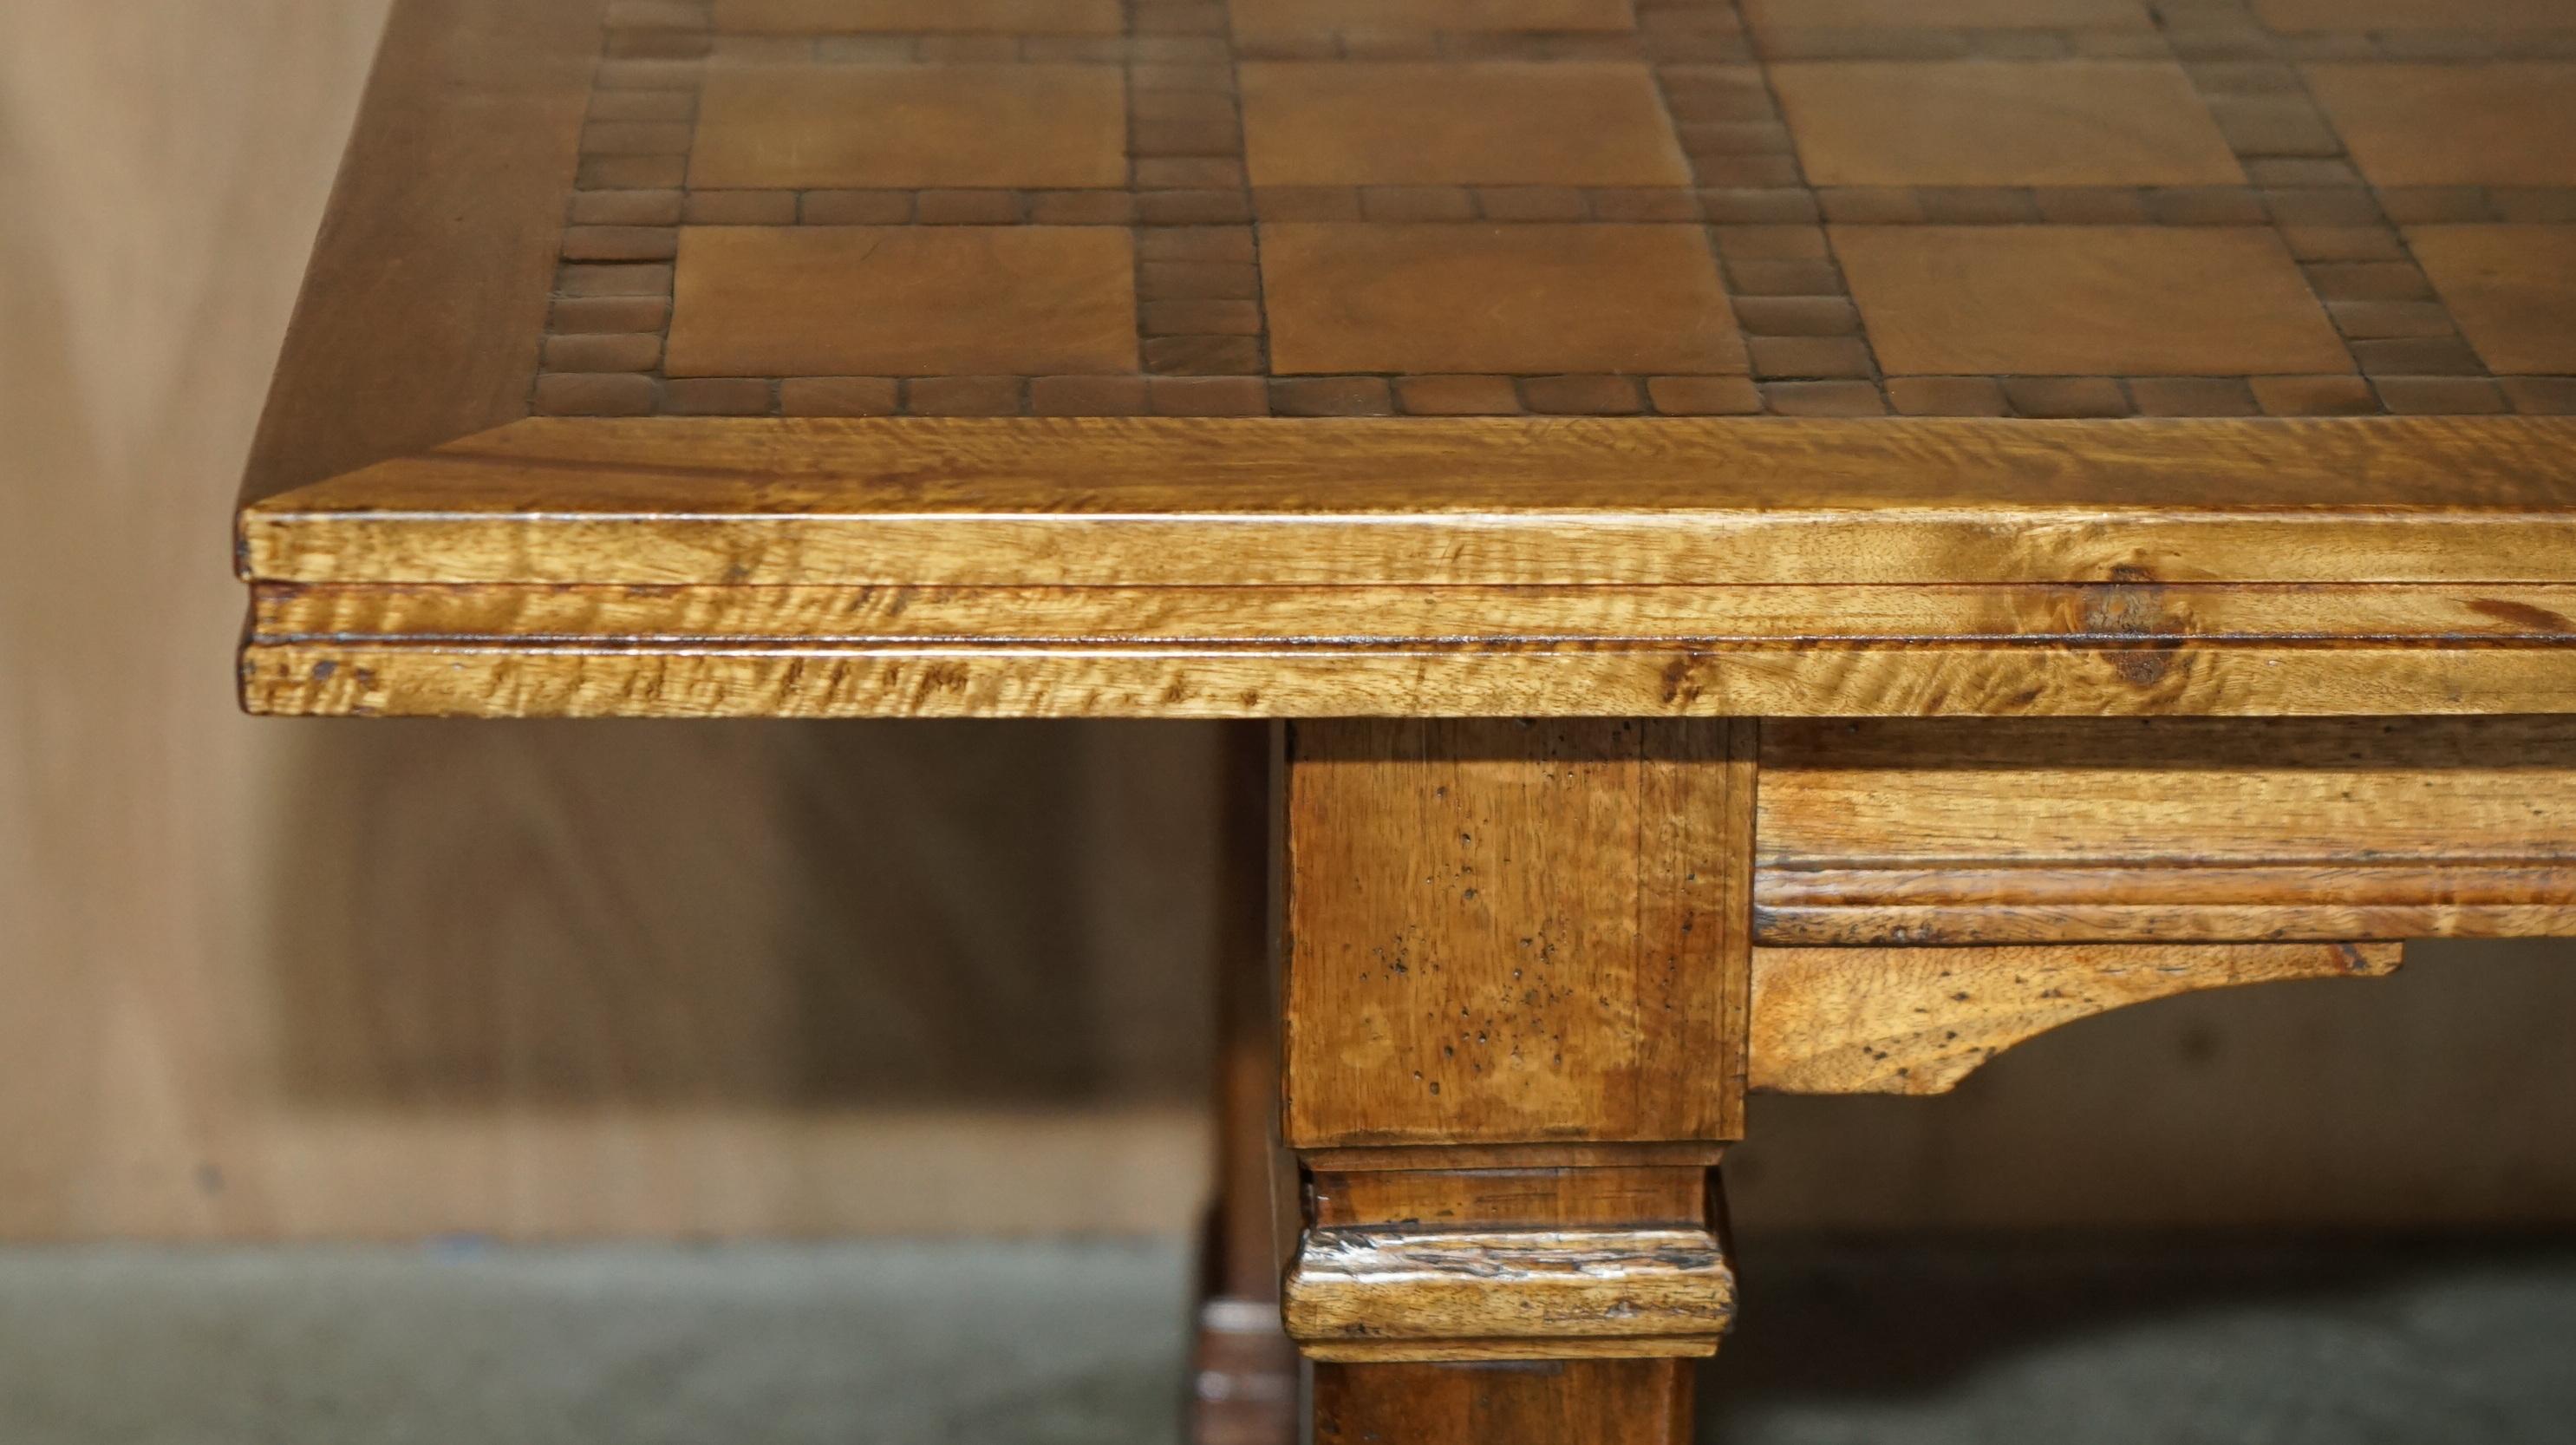 EXQUISITE ViNTAGE OYSTER VENEER & PARQUETRY INLAID REFECTORY DINING TABLE For Sale 3